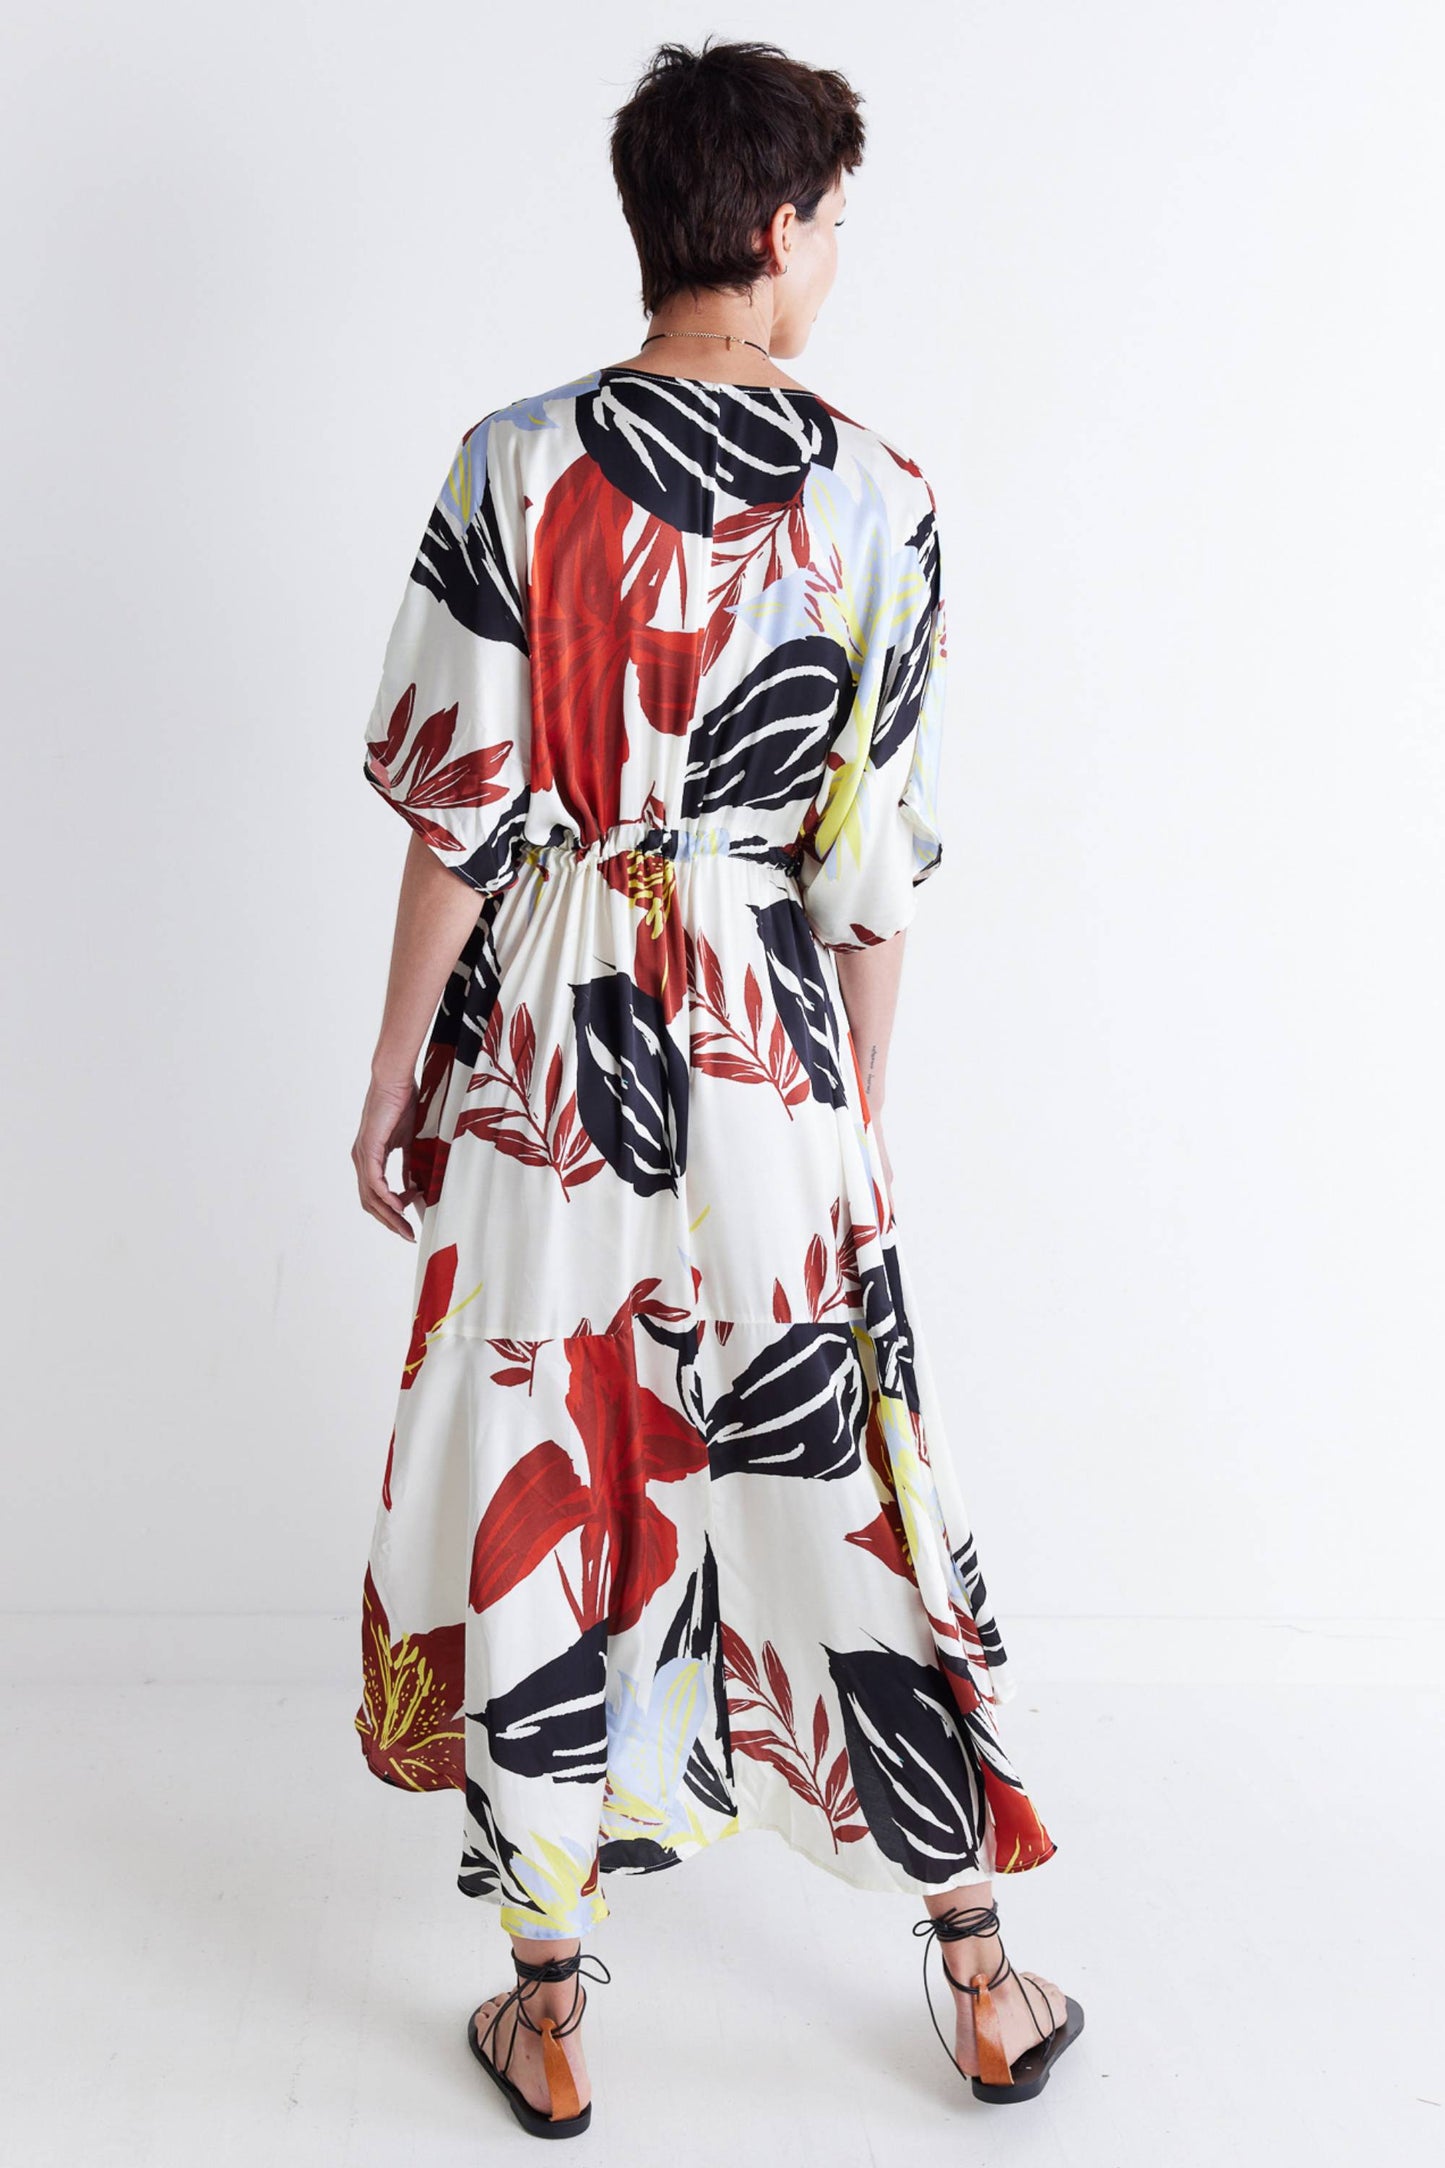 The Masterpiece Floral Dress